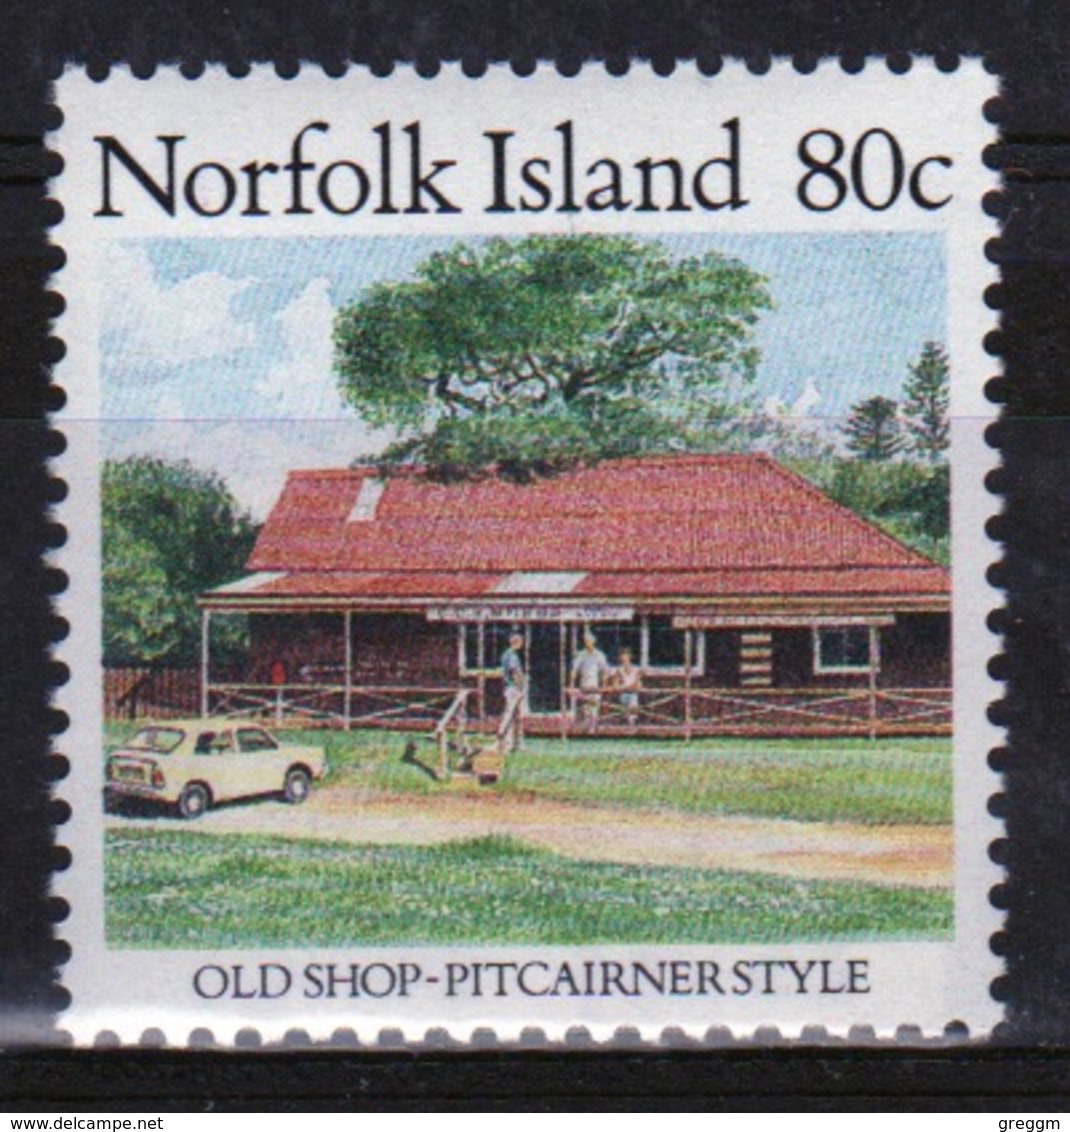 Norfolk Island Single 80c Definitive Stamp From The 1987 Island Scenes. - Norfolk Island